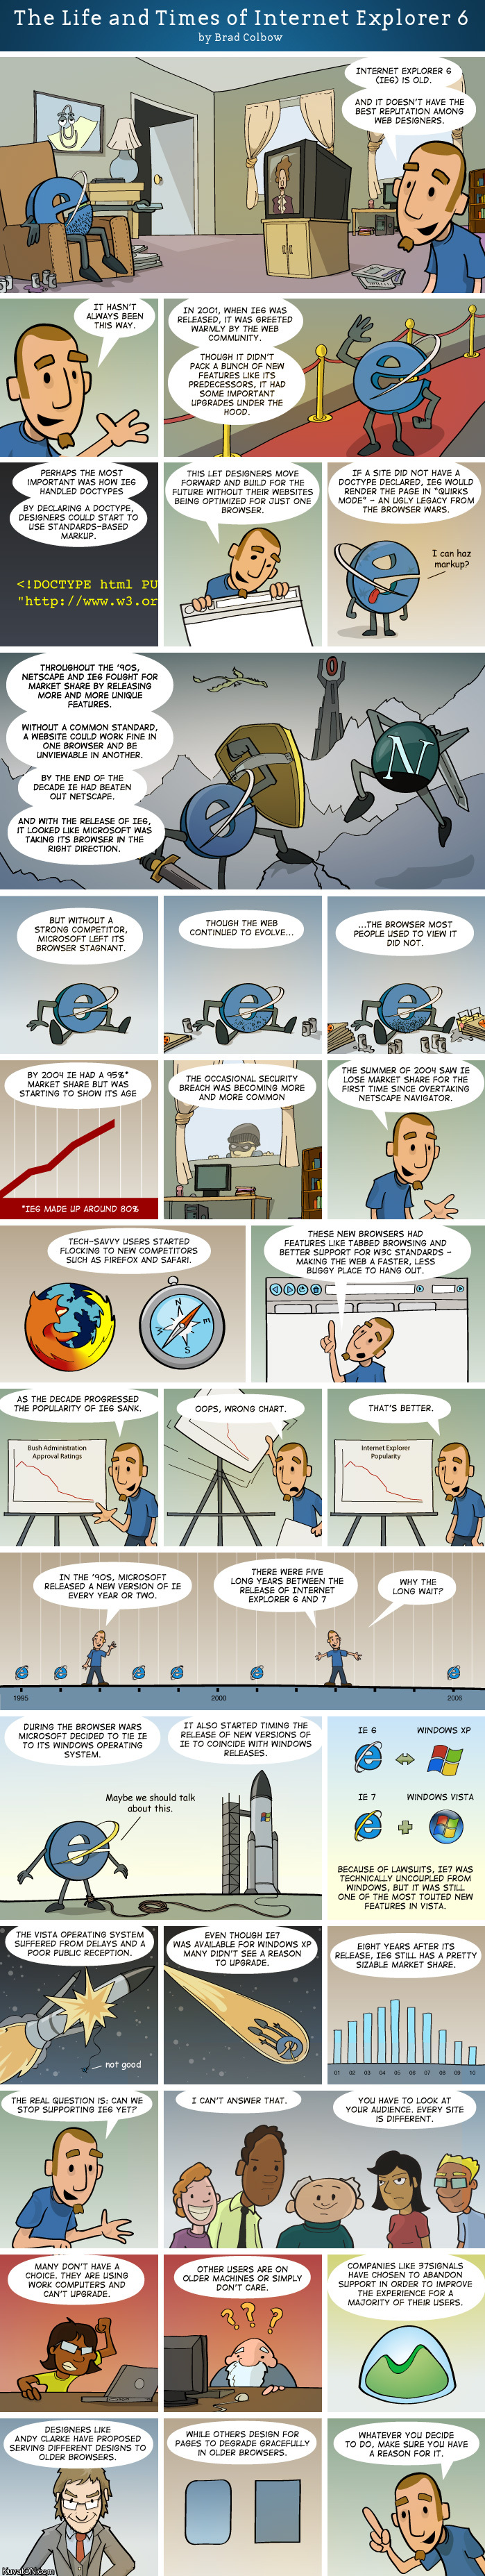 the_life_and_times_of_internet_explorer_6.jpg